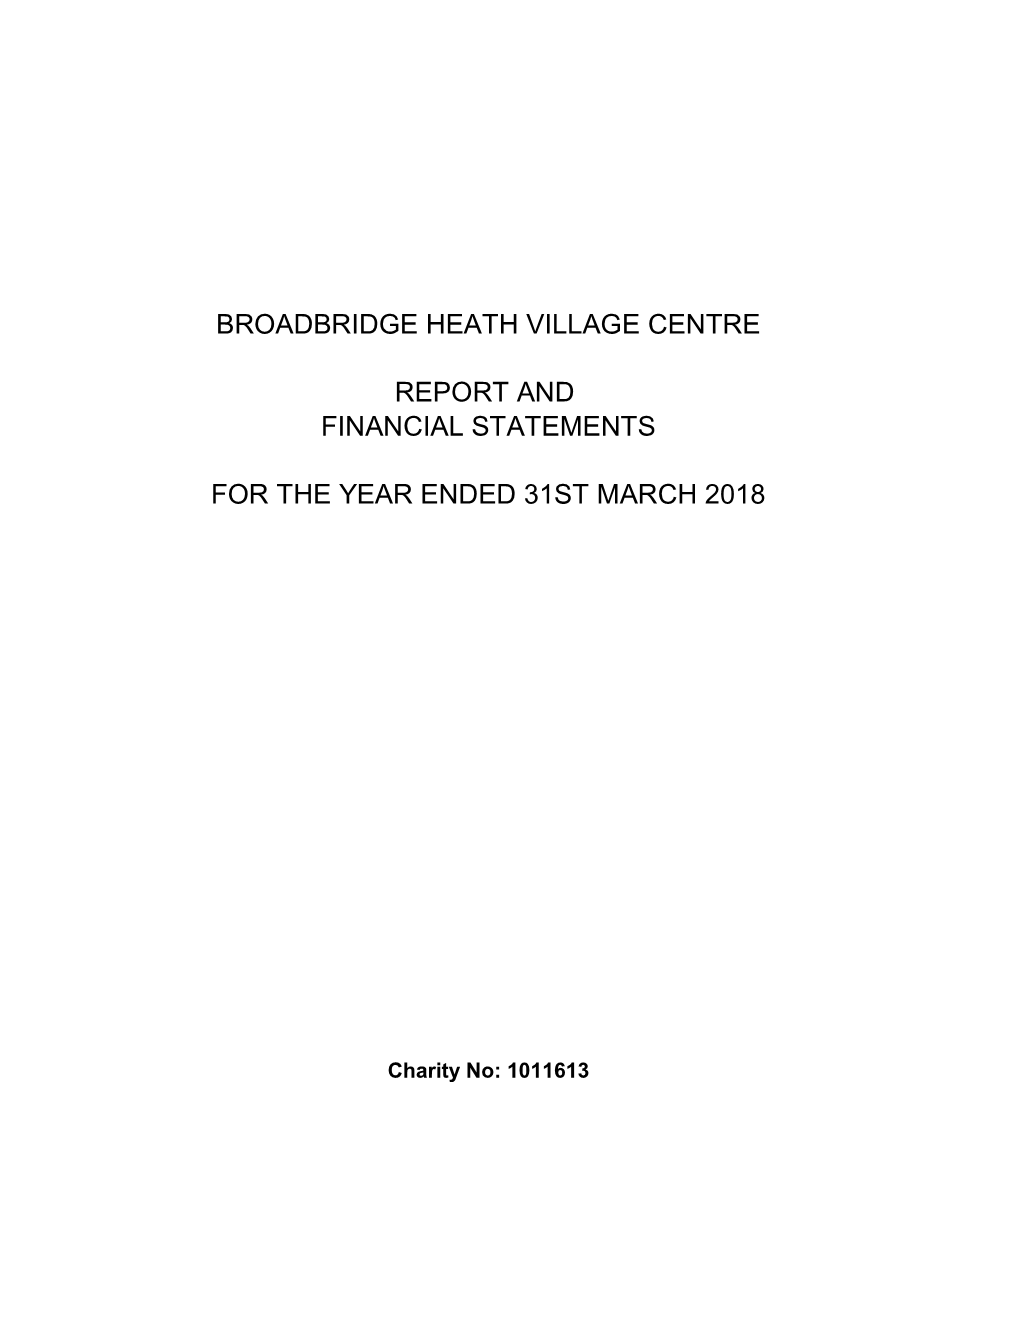 Broadbridge Heath Village Centre Report and Financial Statements for the Year Ended 31St March 2018